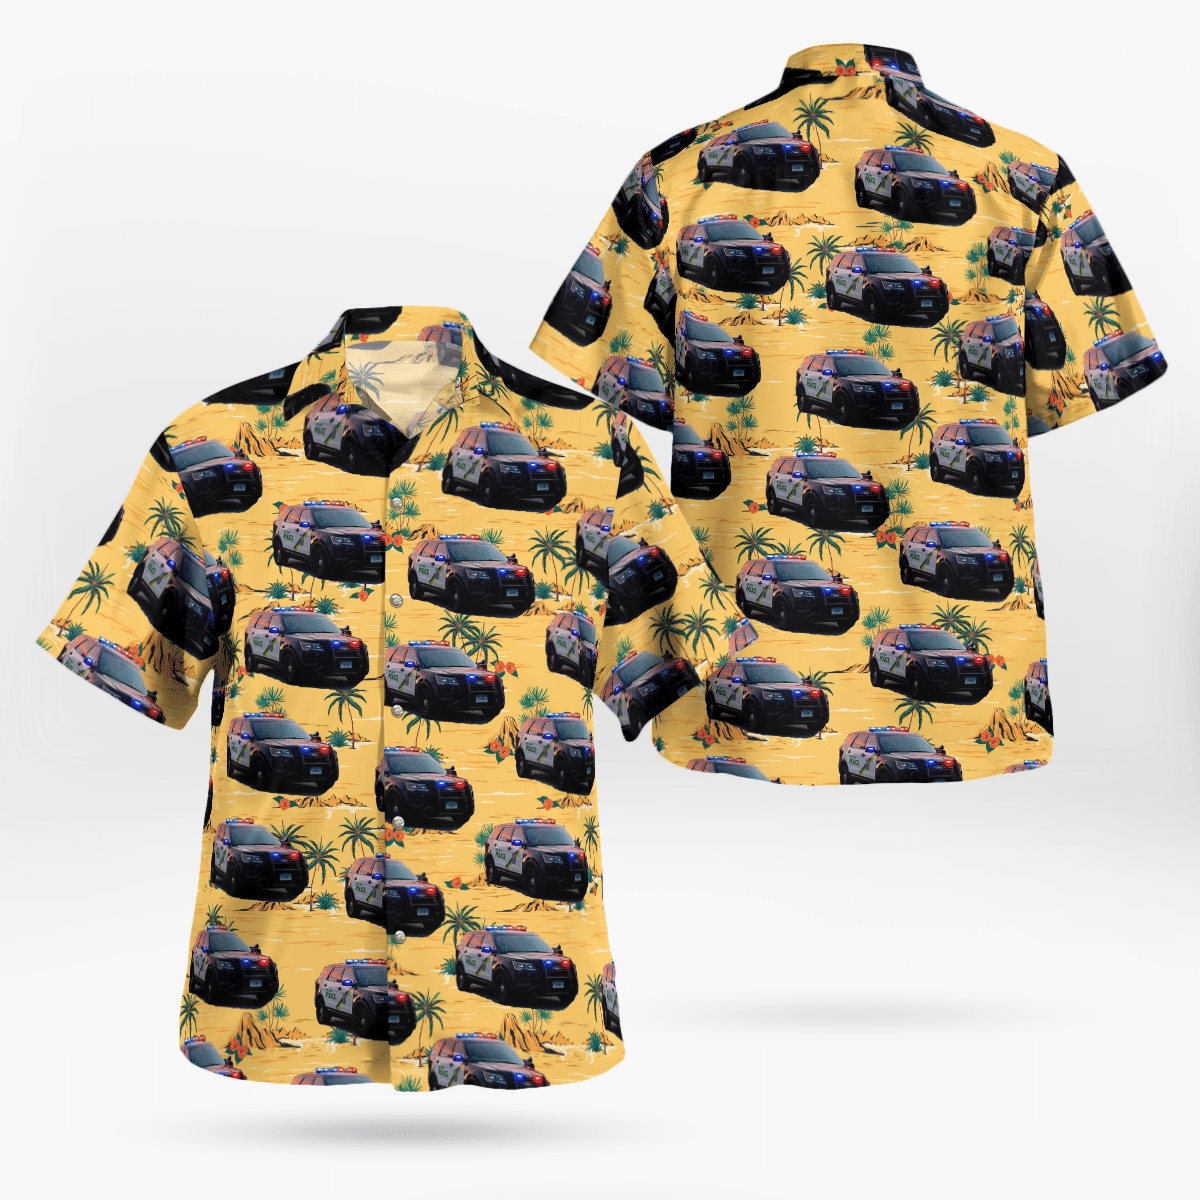 Consider getting these Hawaiian Shirt for your friends 447